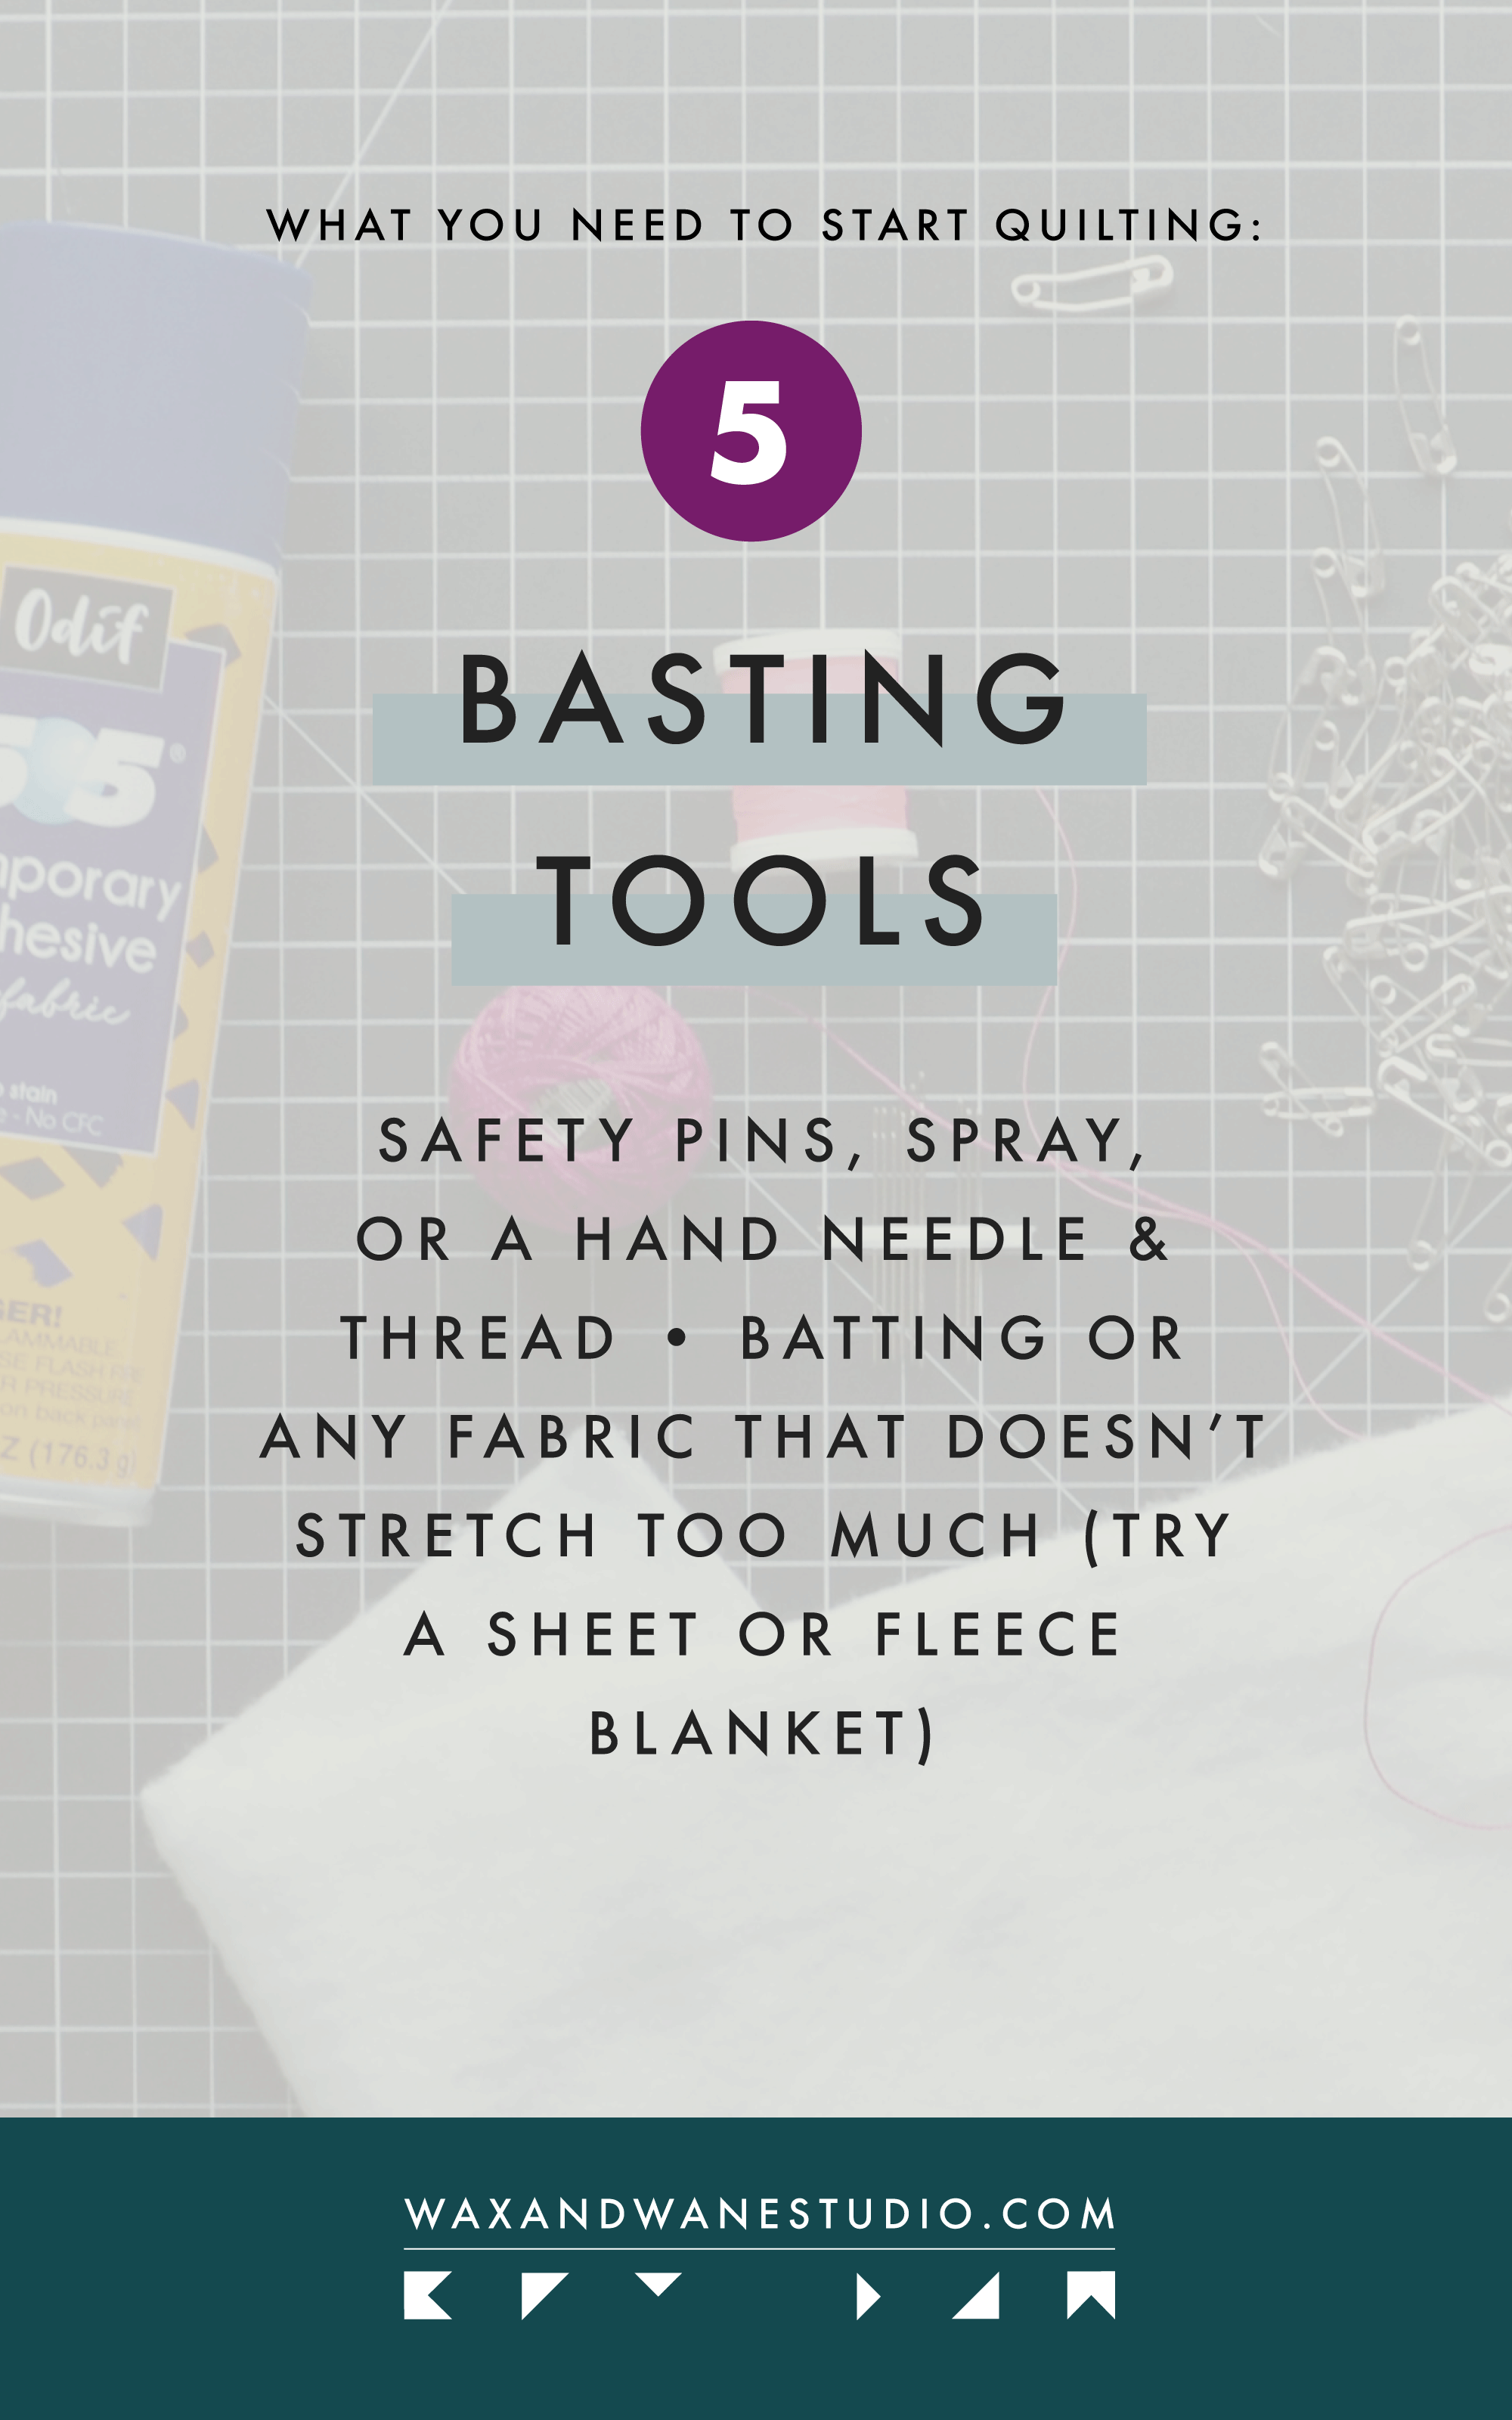 The Quilting tools and materials you need to get started - SewGuide